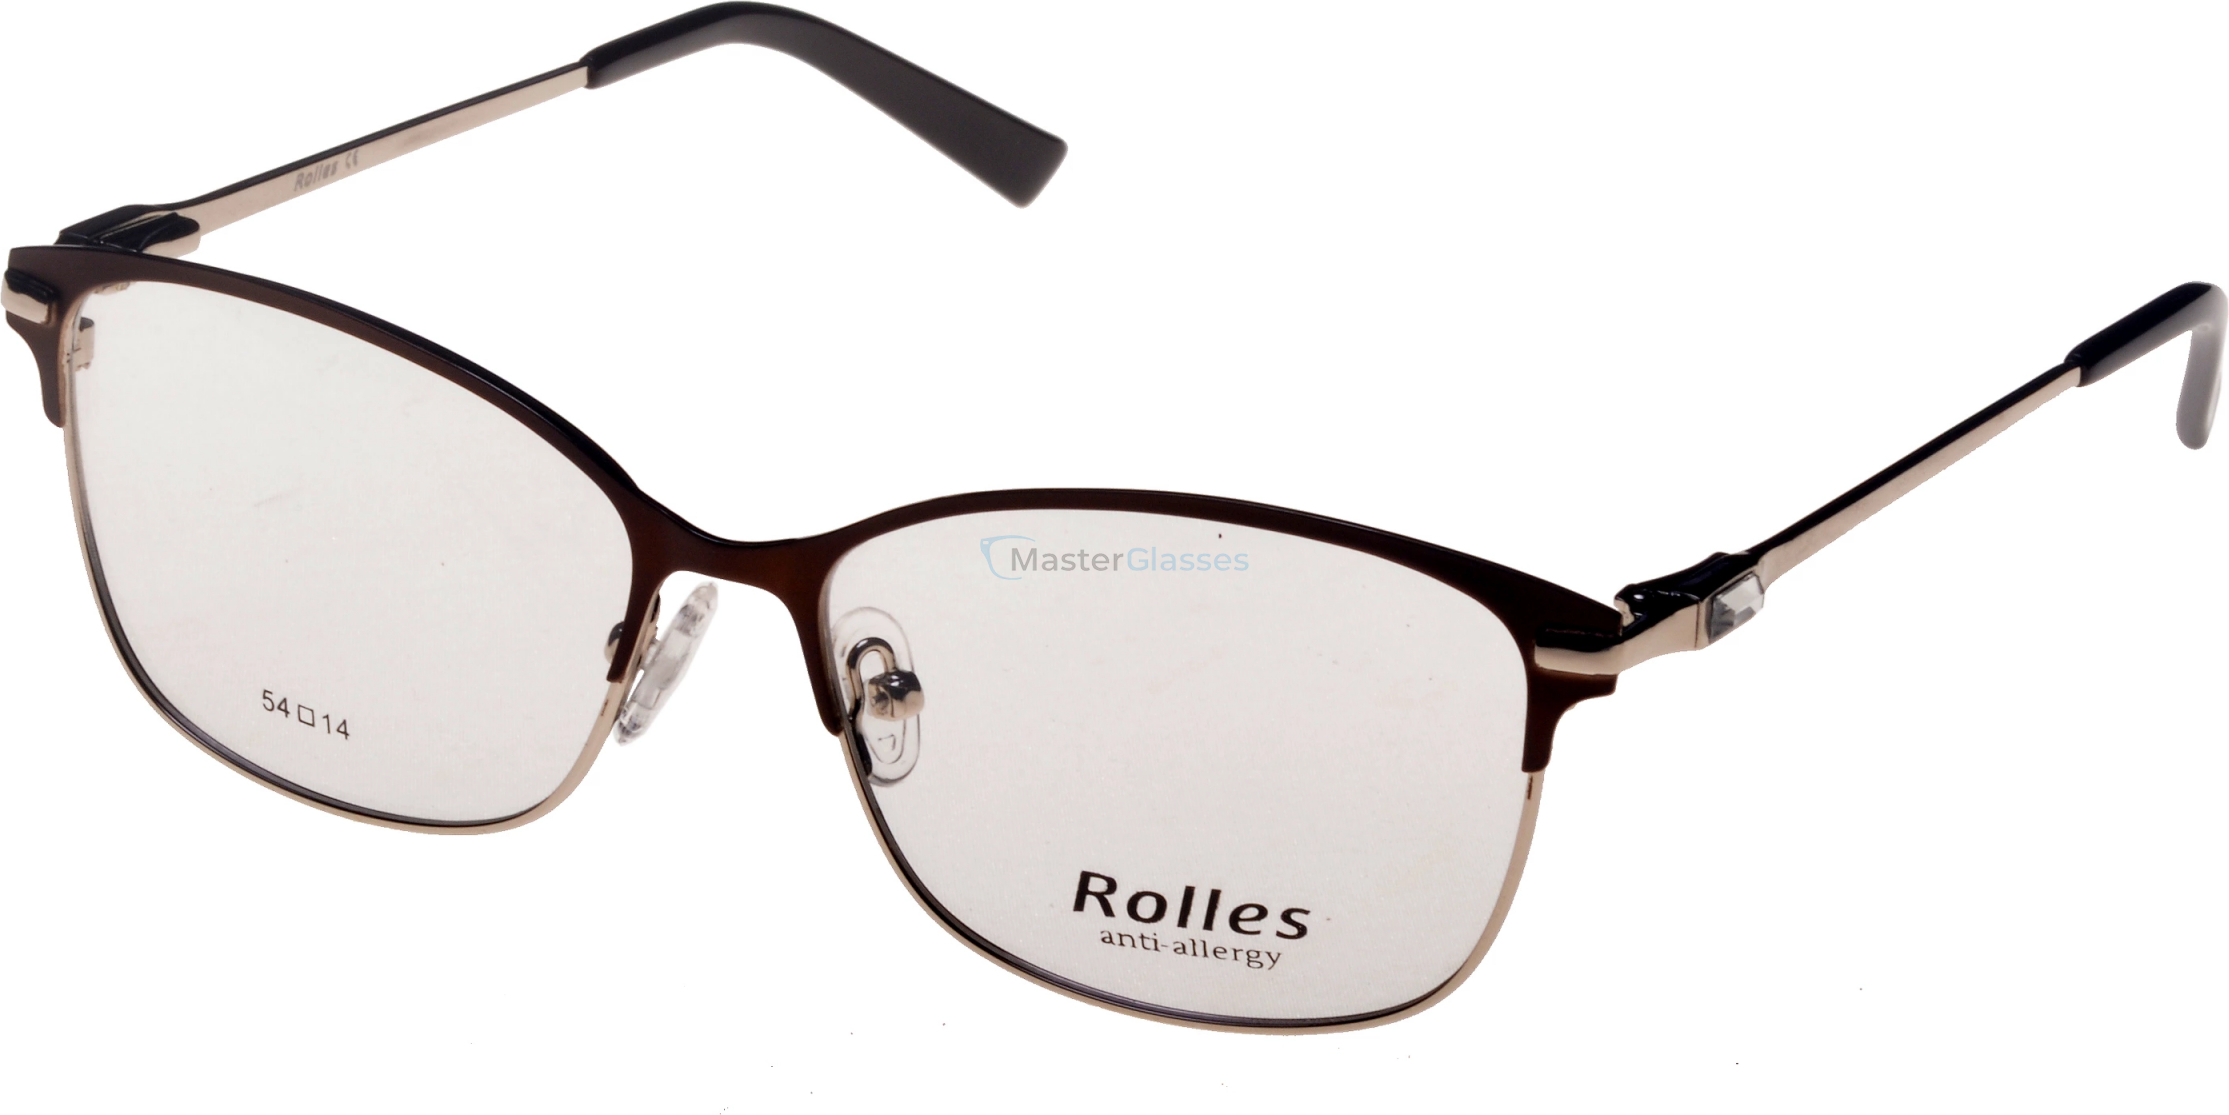  Rolles 681 02